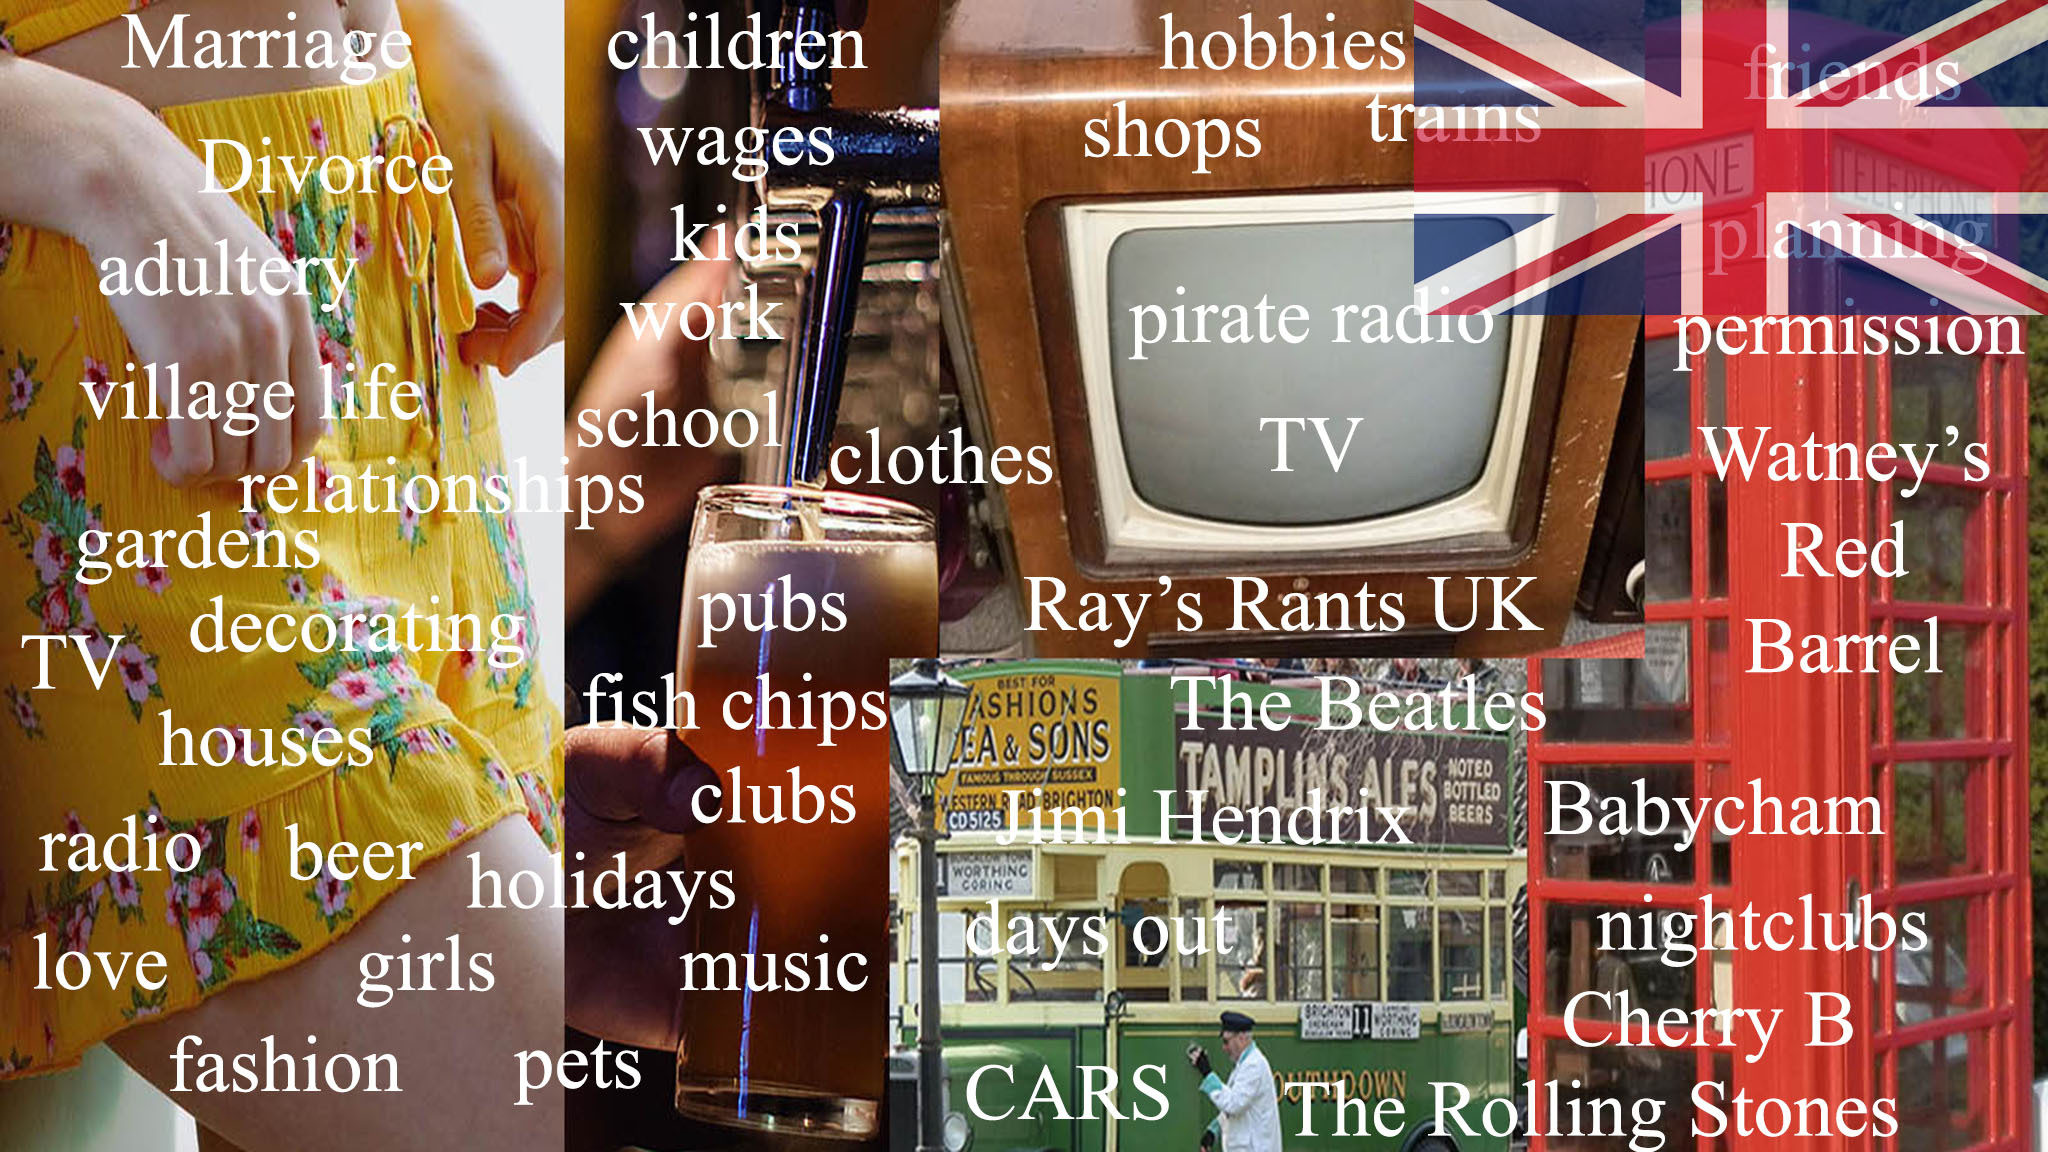 Ray’s Rants Life in the 1950s 1960s 1970s Great Britain girls England family UK work school British music night clubs pubs fashion pirate radio Caroline holidays television